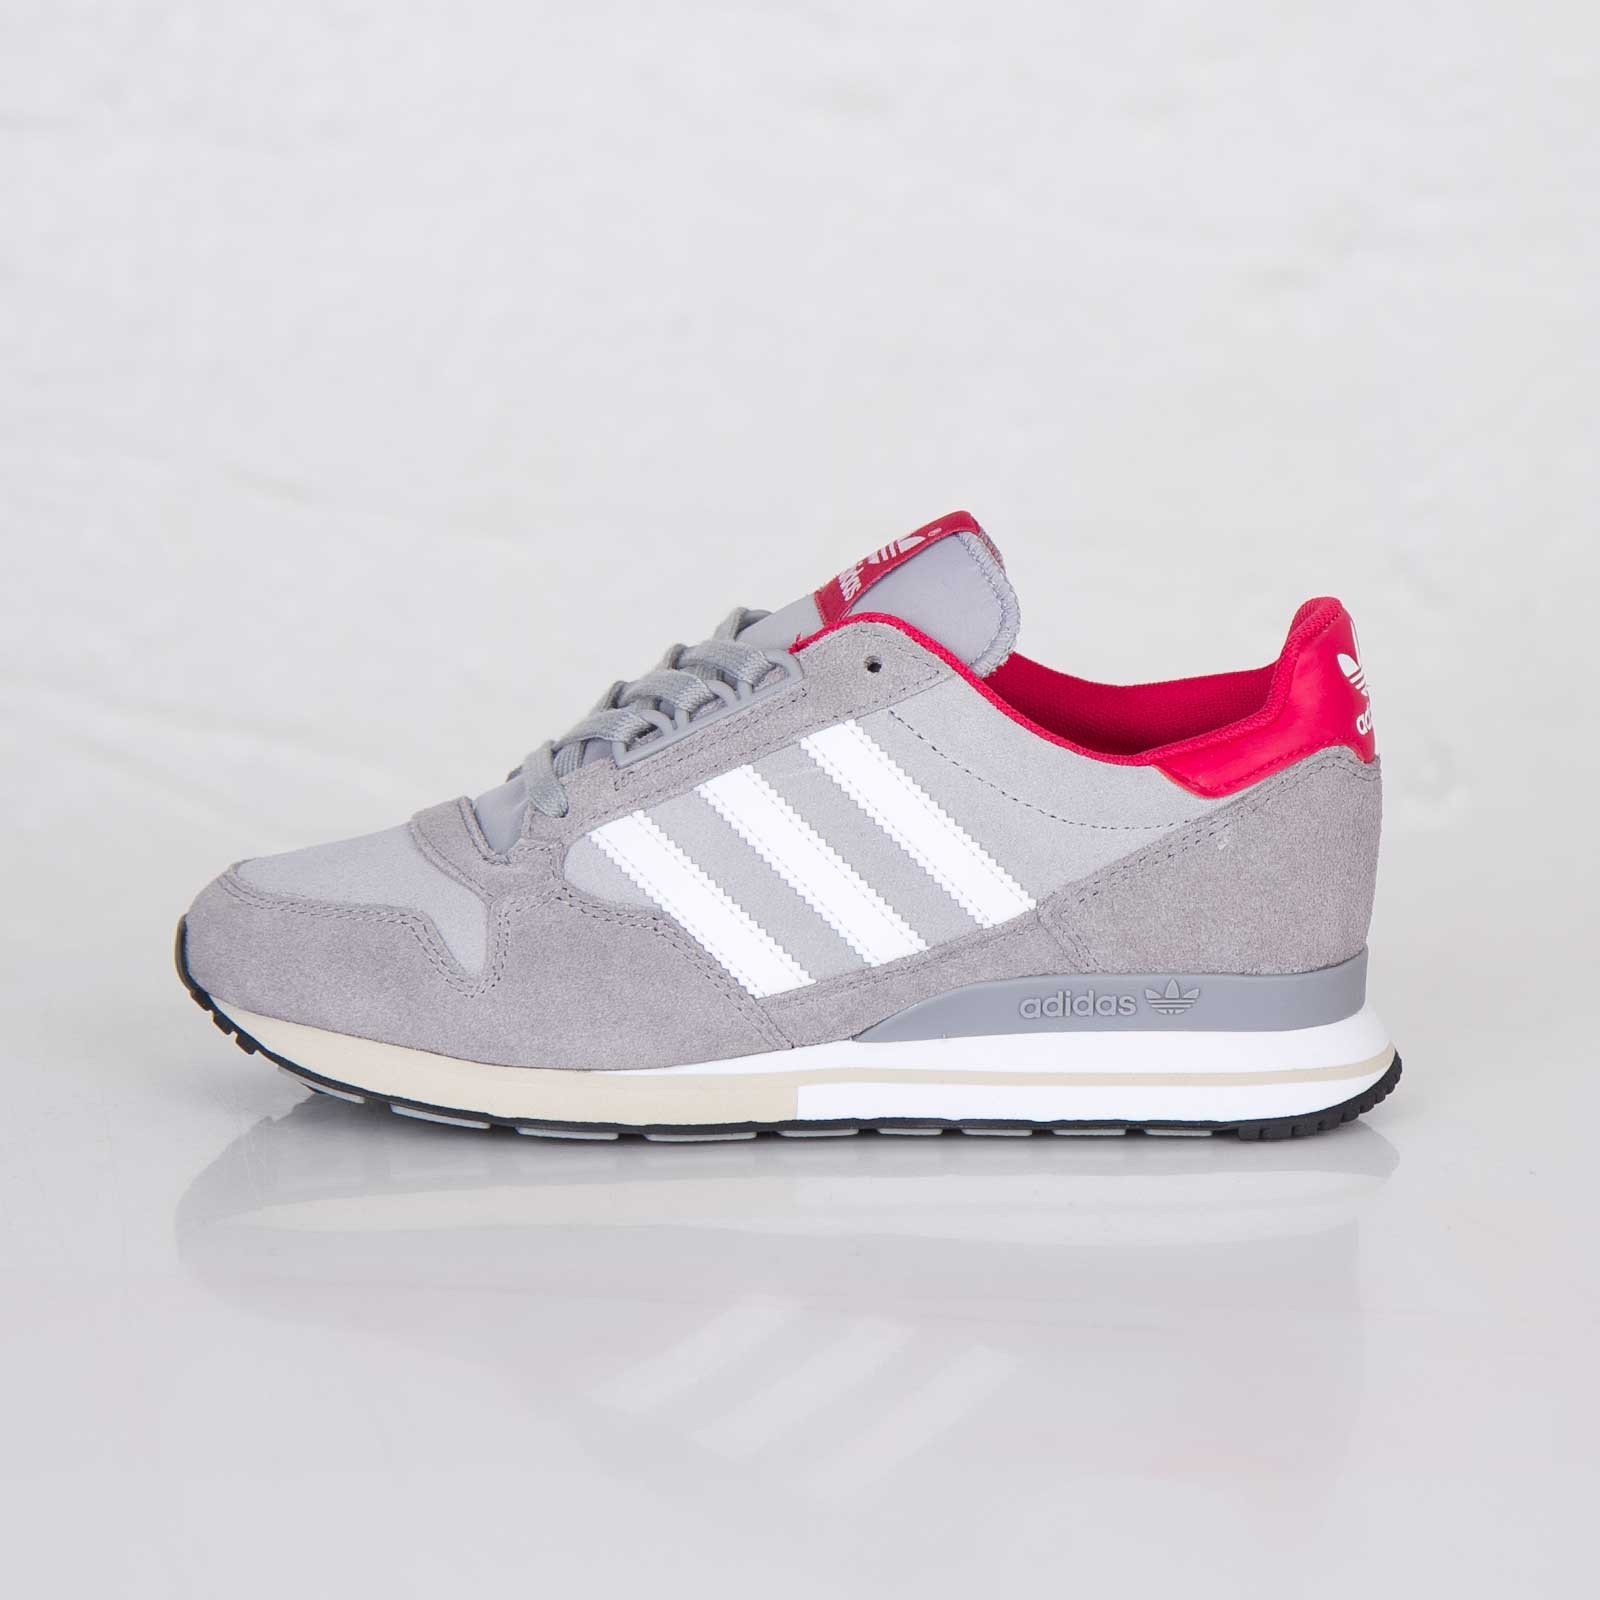 adidas zx 500 moins cher